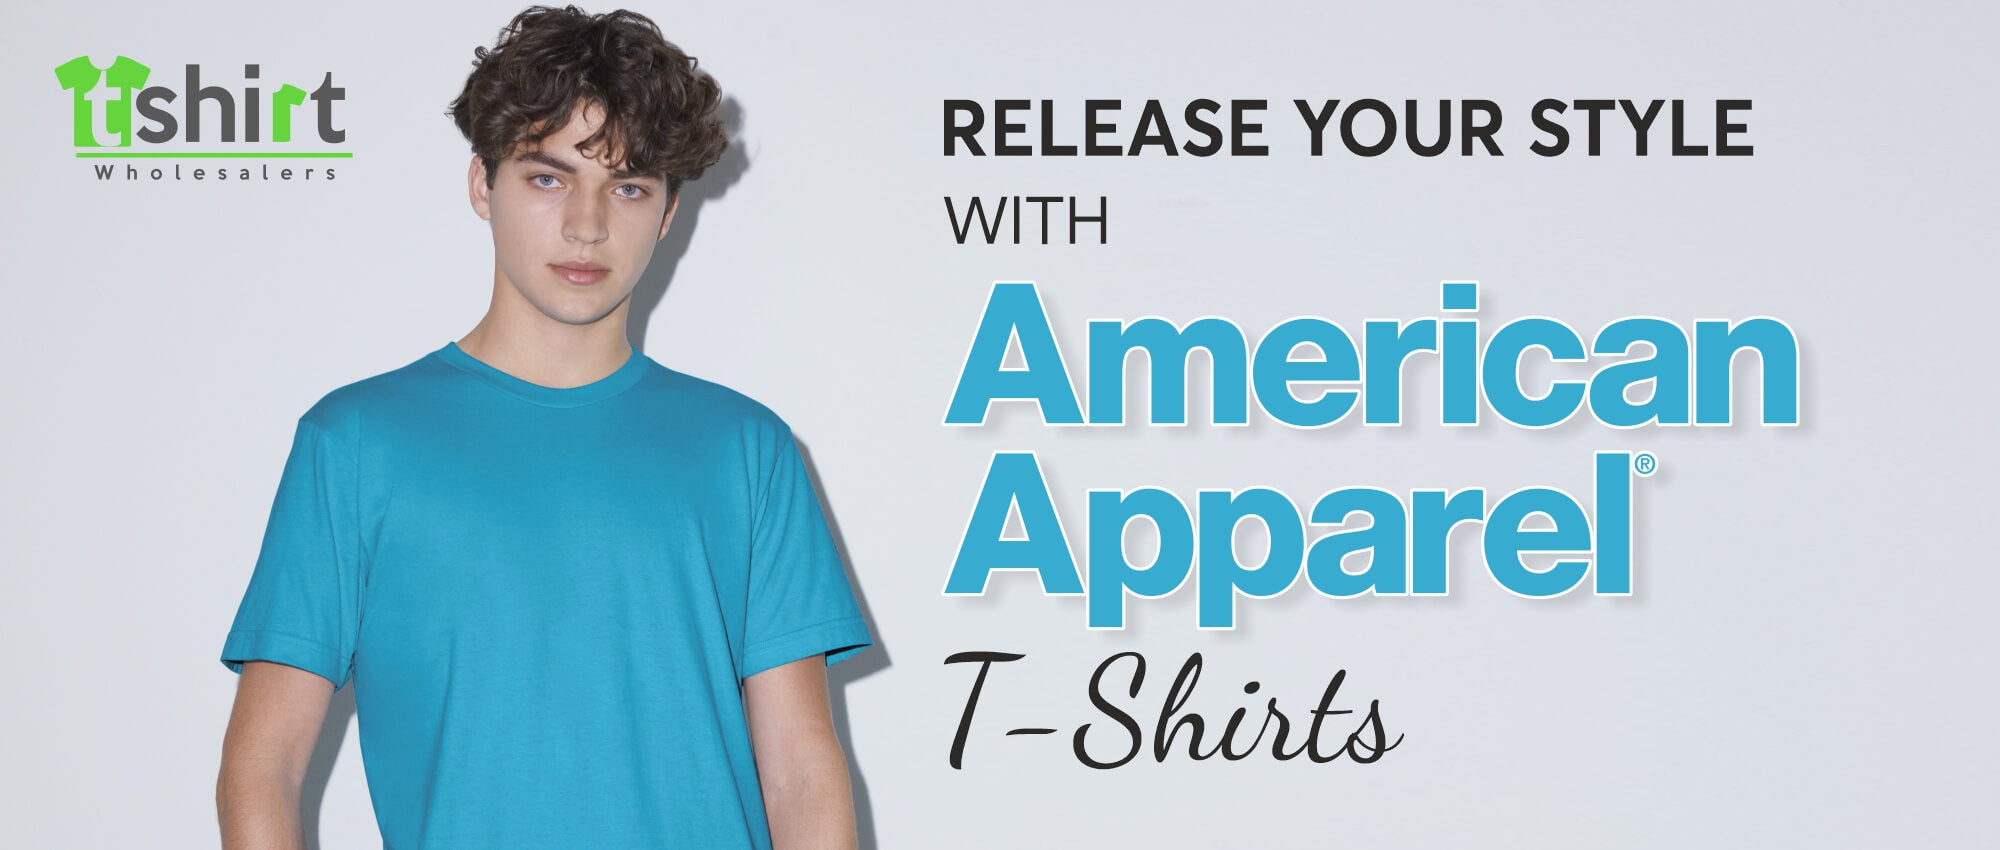 RELEASE YOUR STYLE WITH AMERICAN APPAREL T-SHIRTS